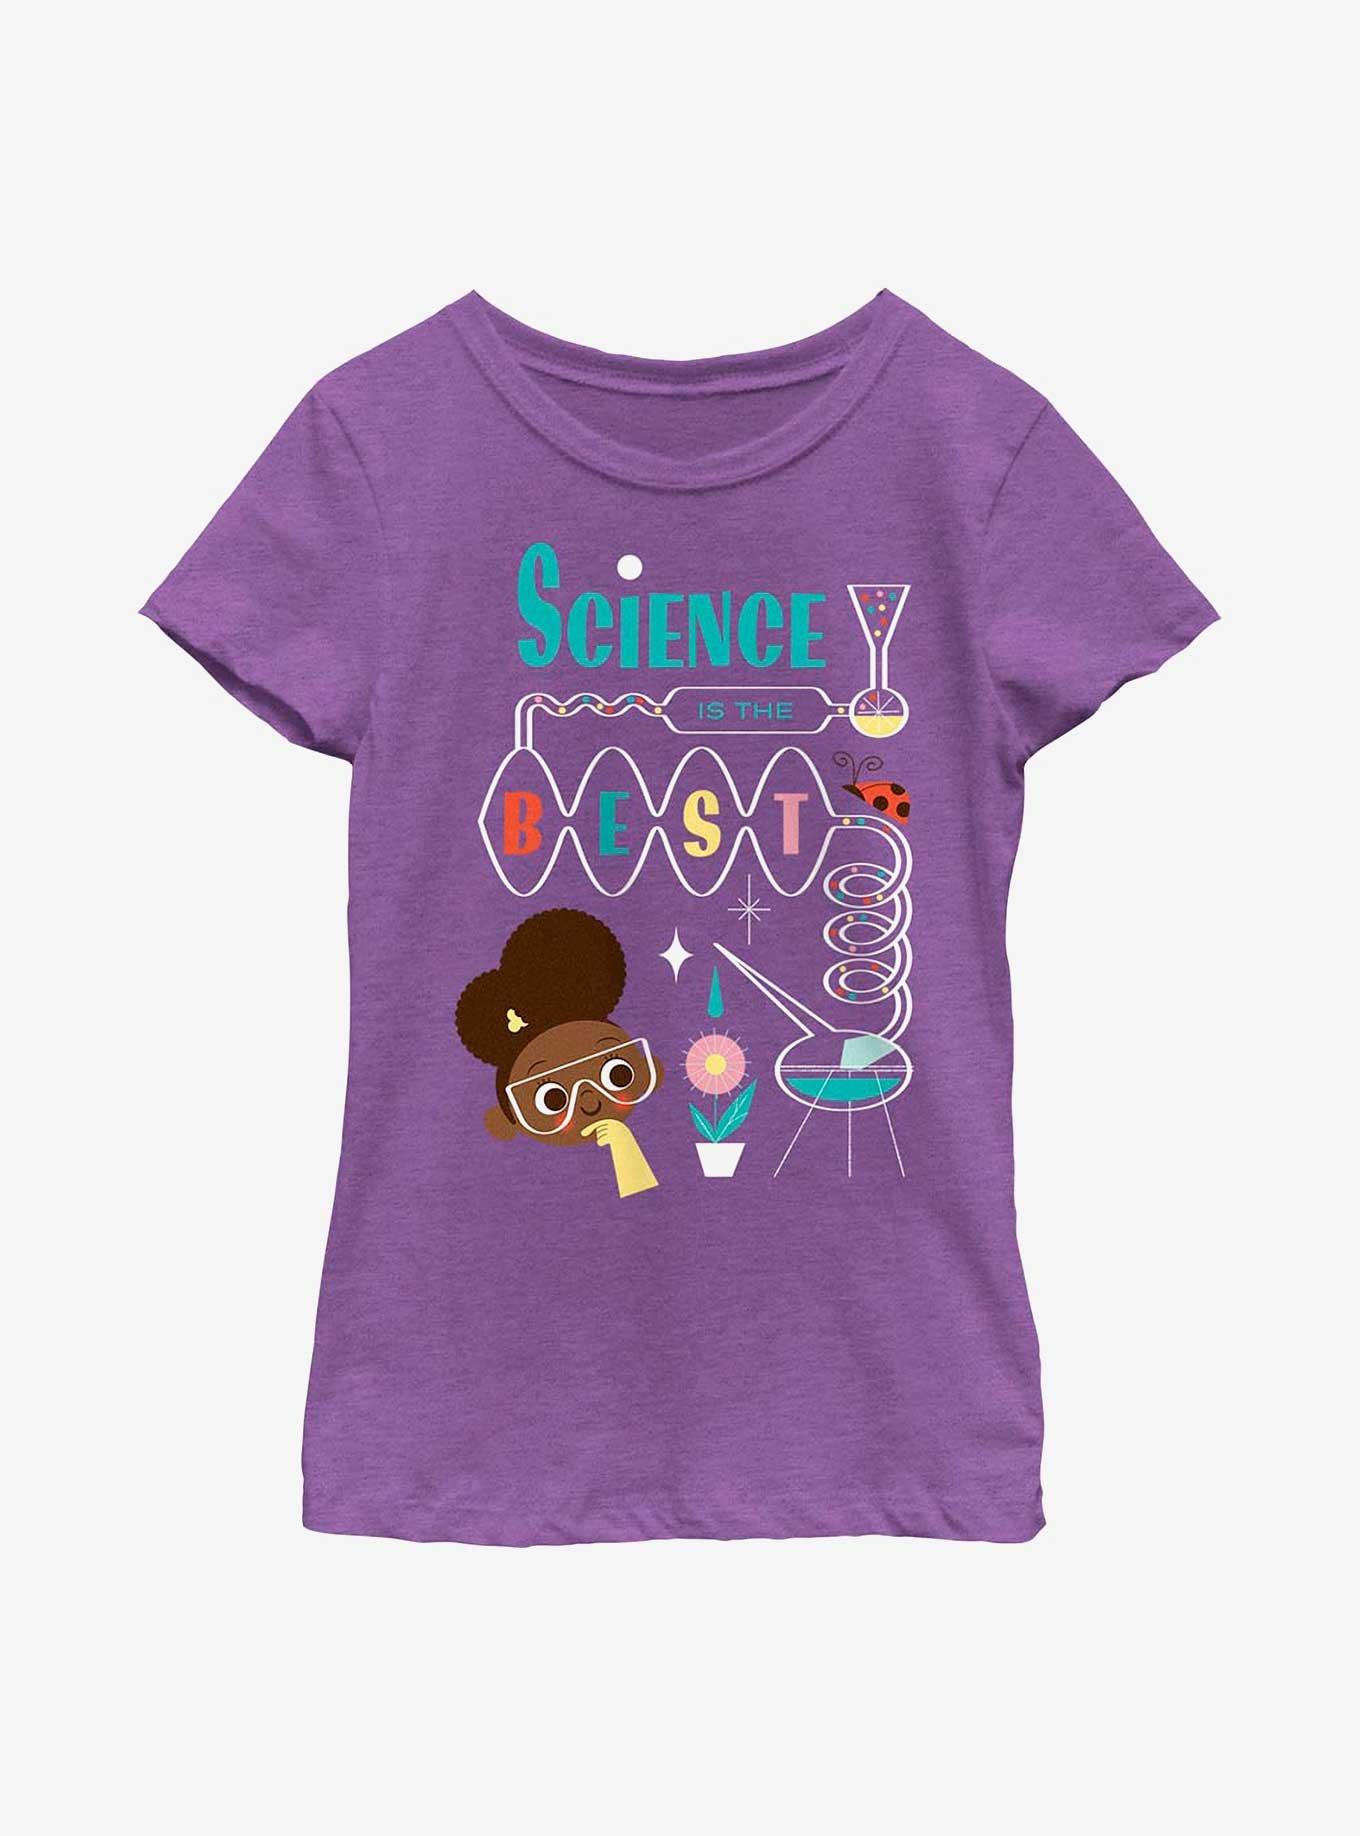 Ada Twist, Scientist Science Is The Best Titration Youth Girls T-Shirt, PURPLE BERRY, hi-res